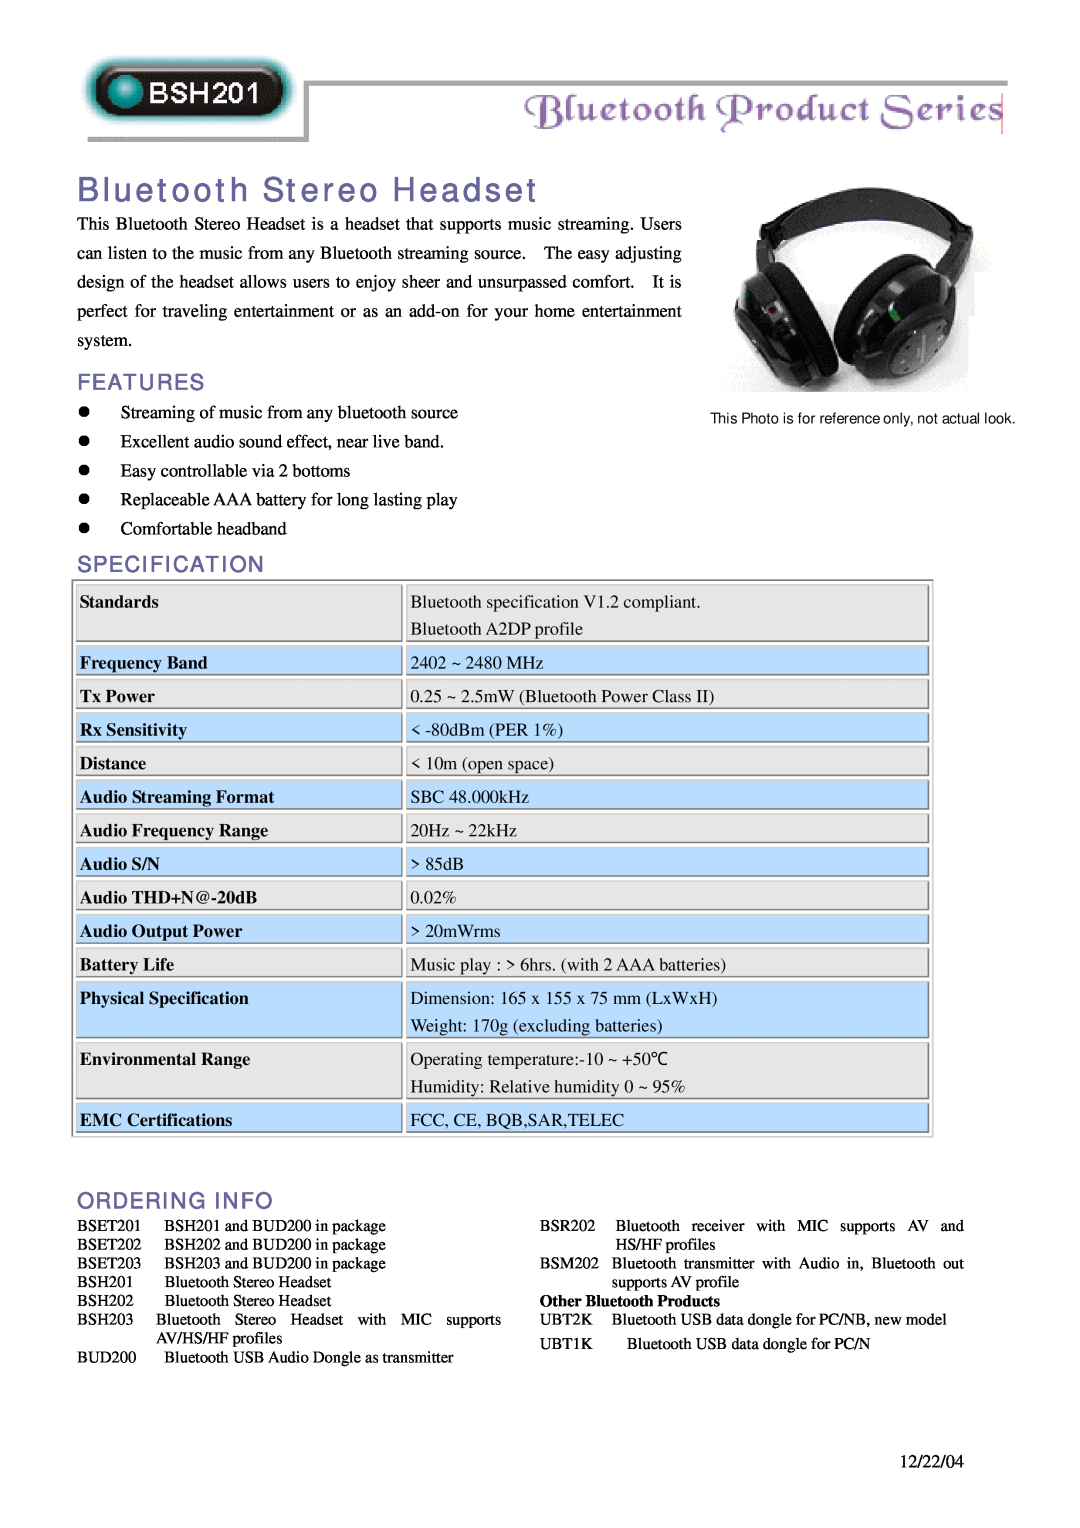 Abocom BSH201 specifications Bluetooth Stereo Headset, Features, Specification, Ordering Info 